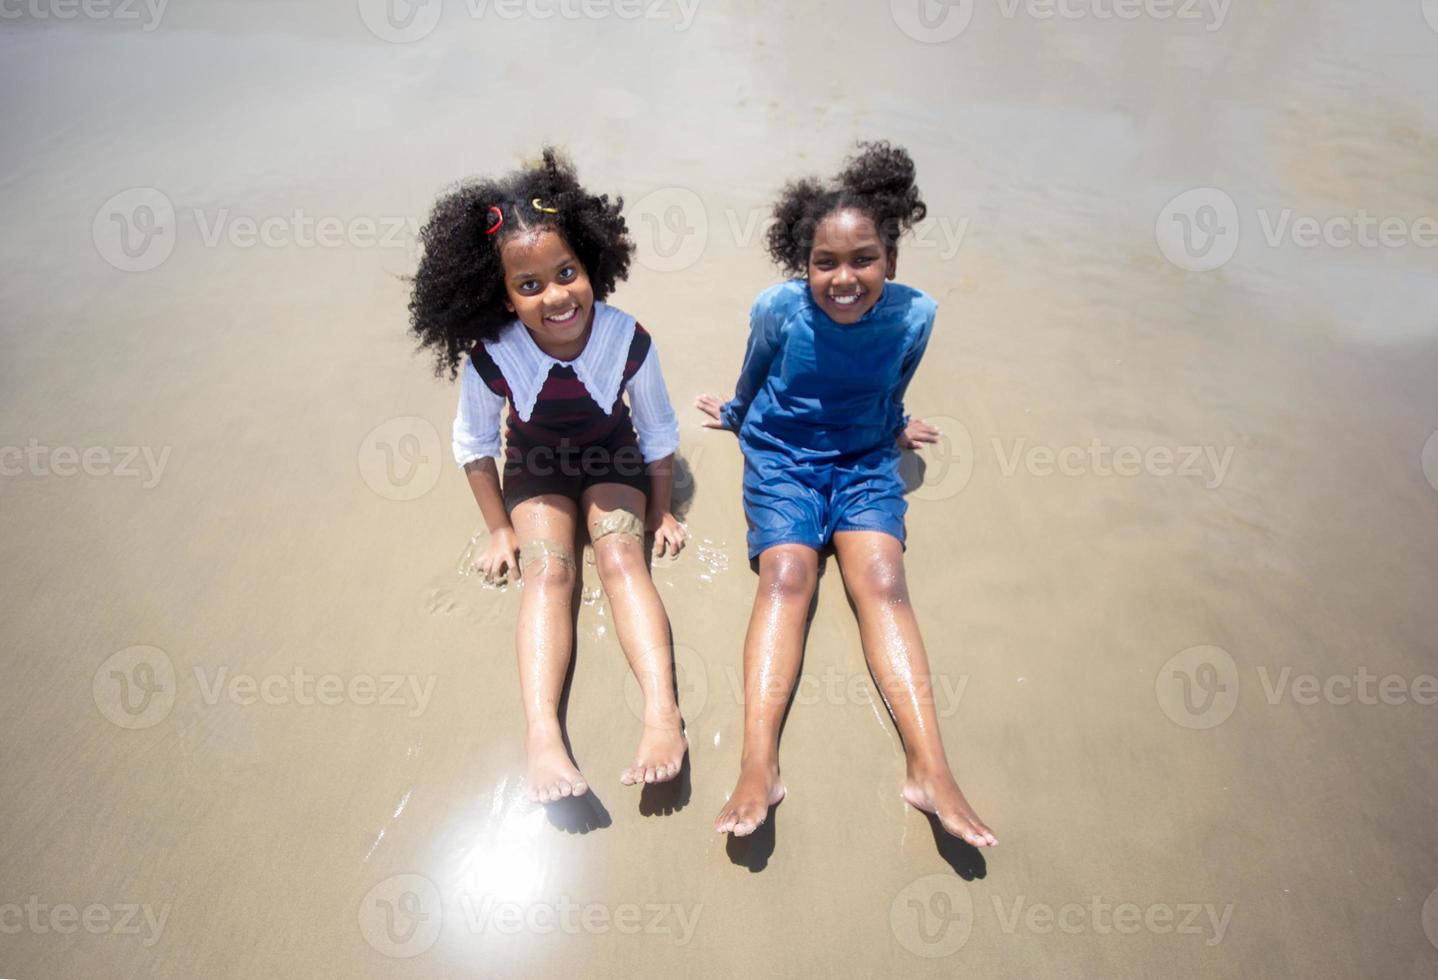 Kids playing running on sand at the beach photo